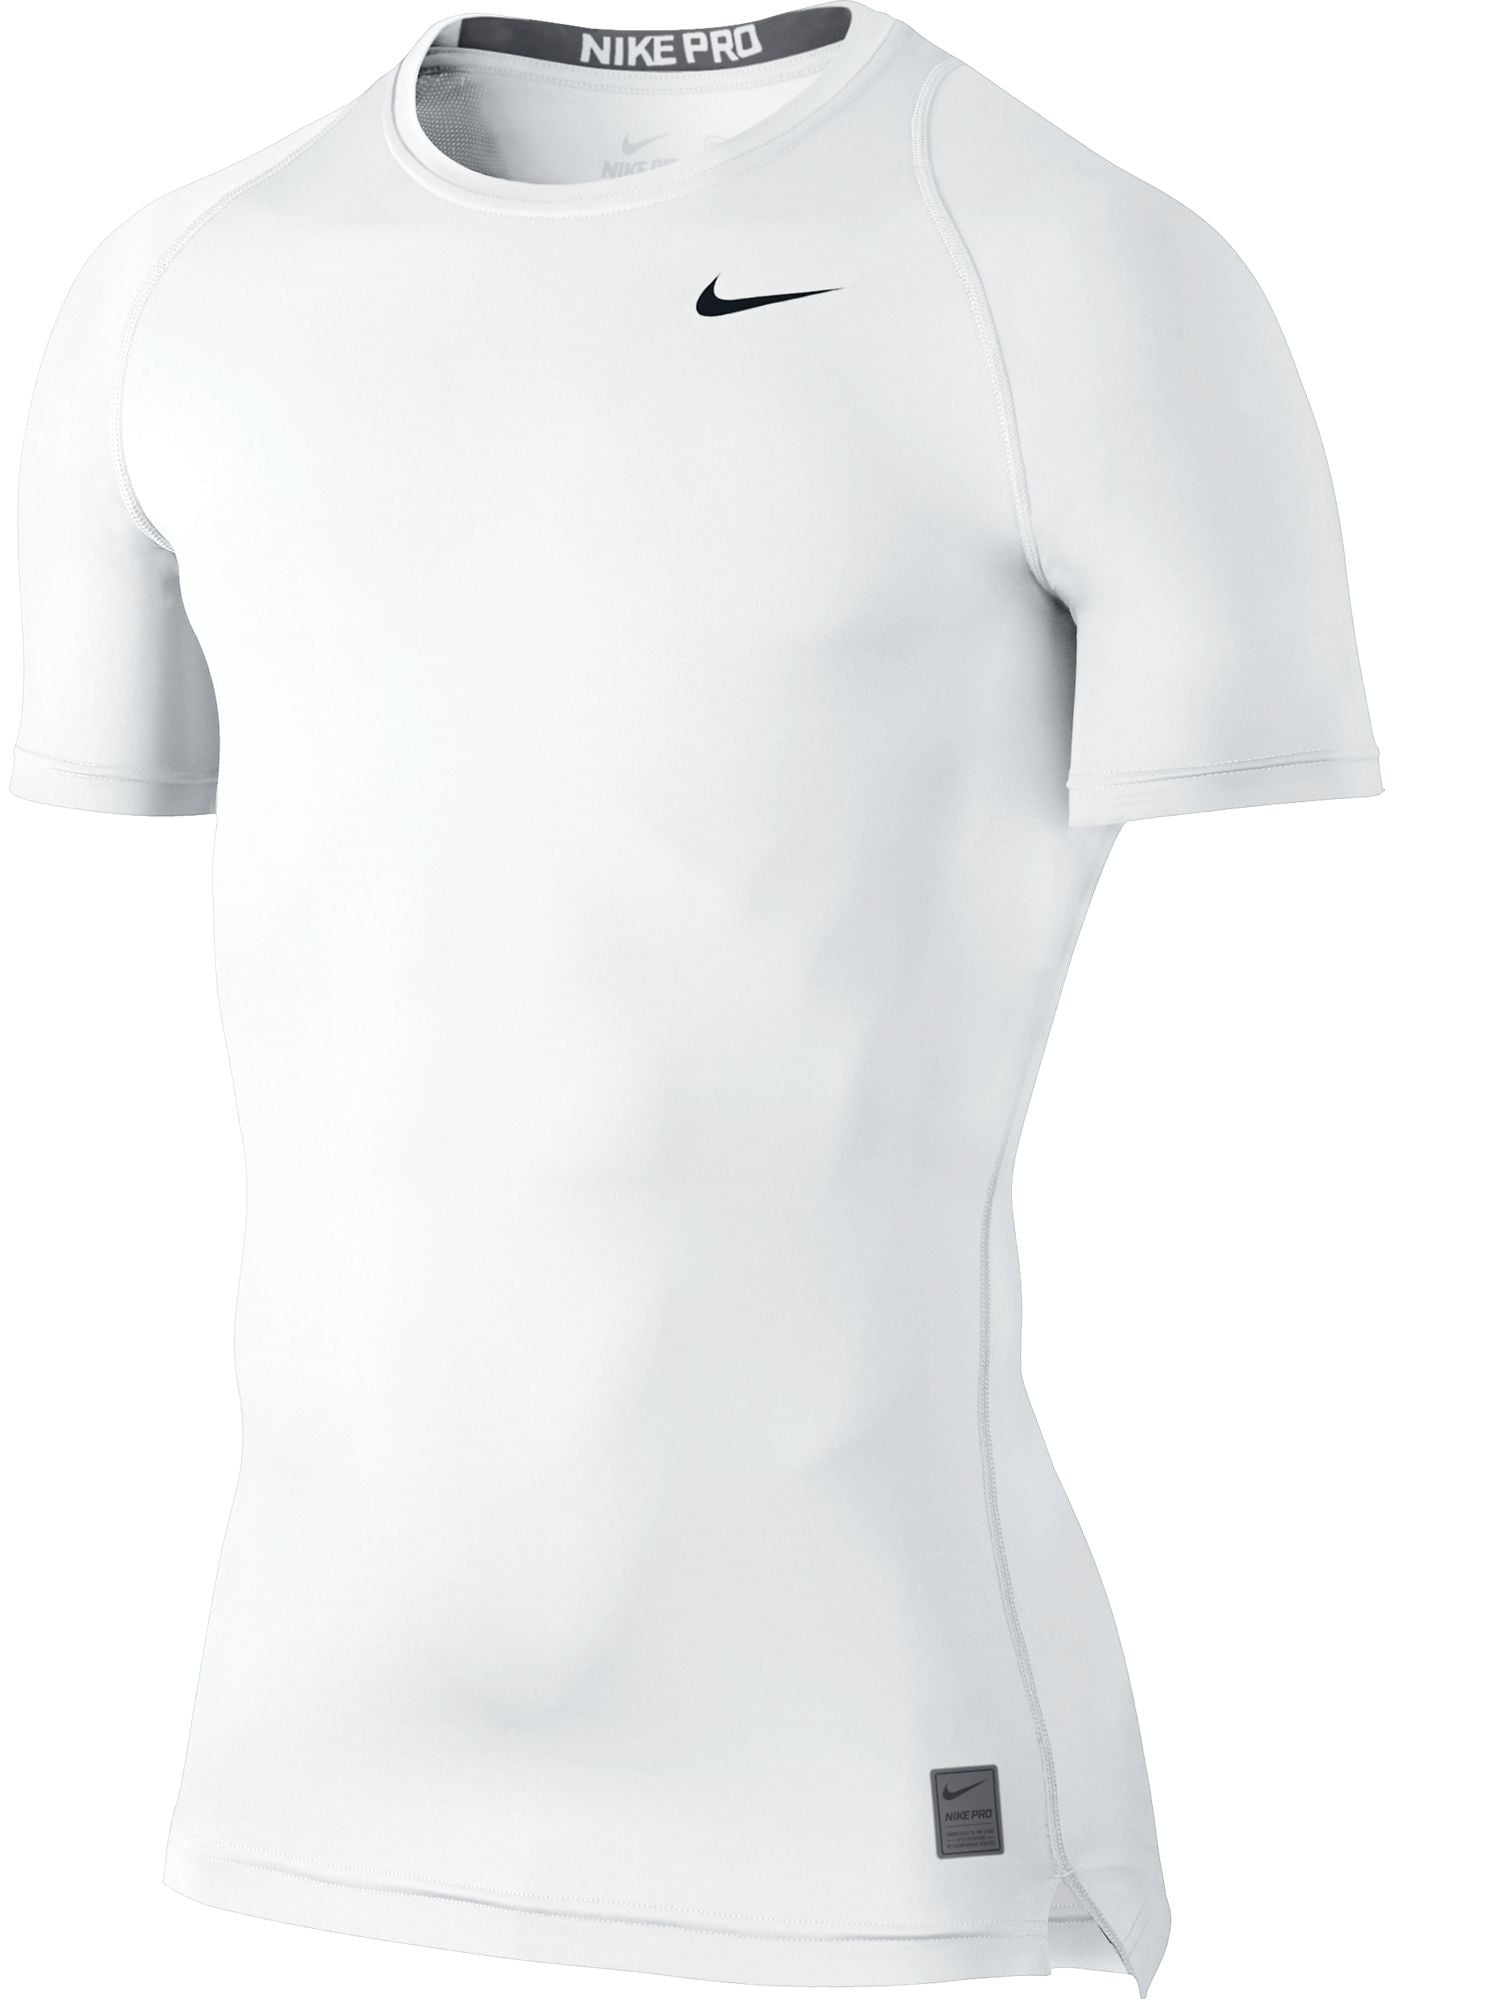 Nike pro cool compression sleeve top White/Black 703094-100 -